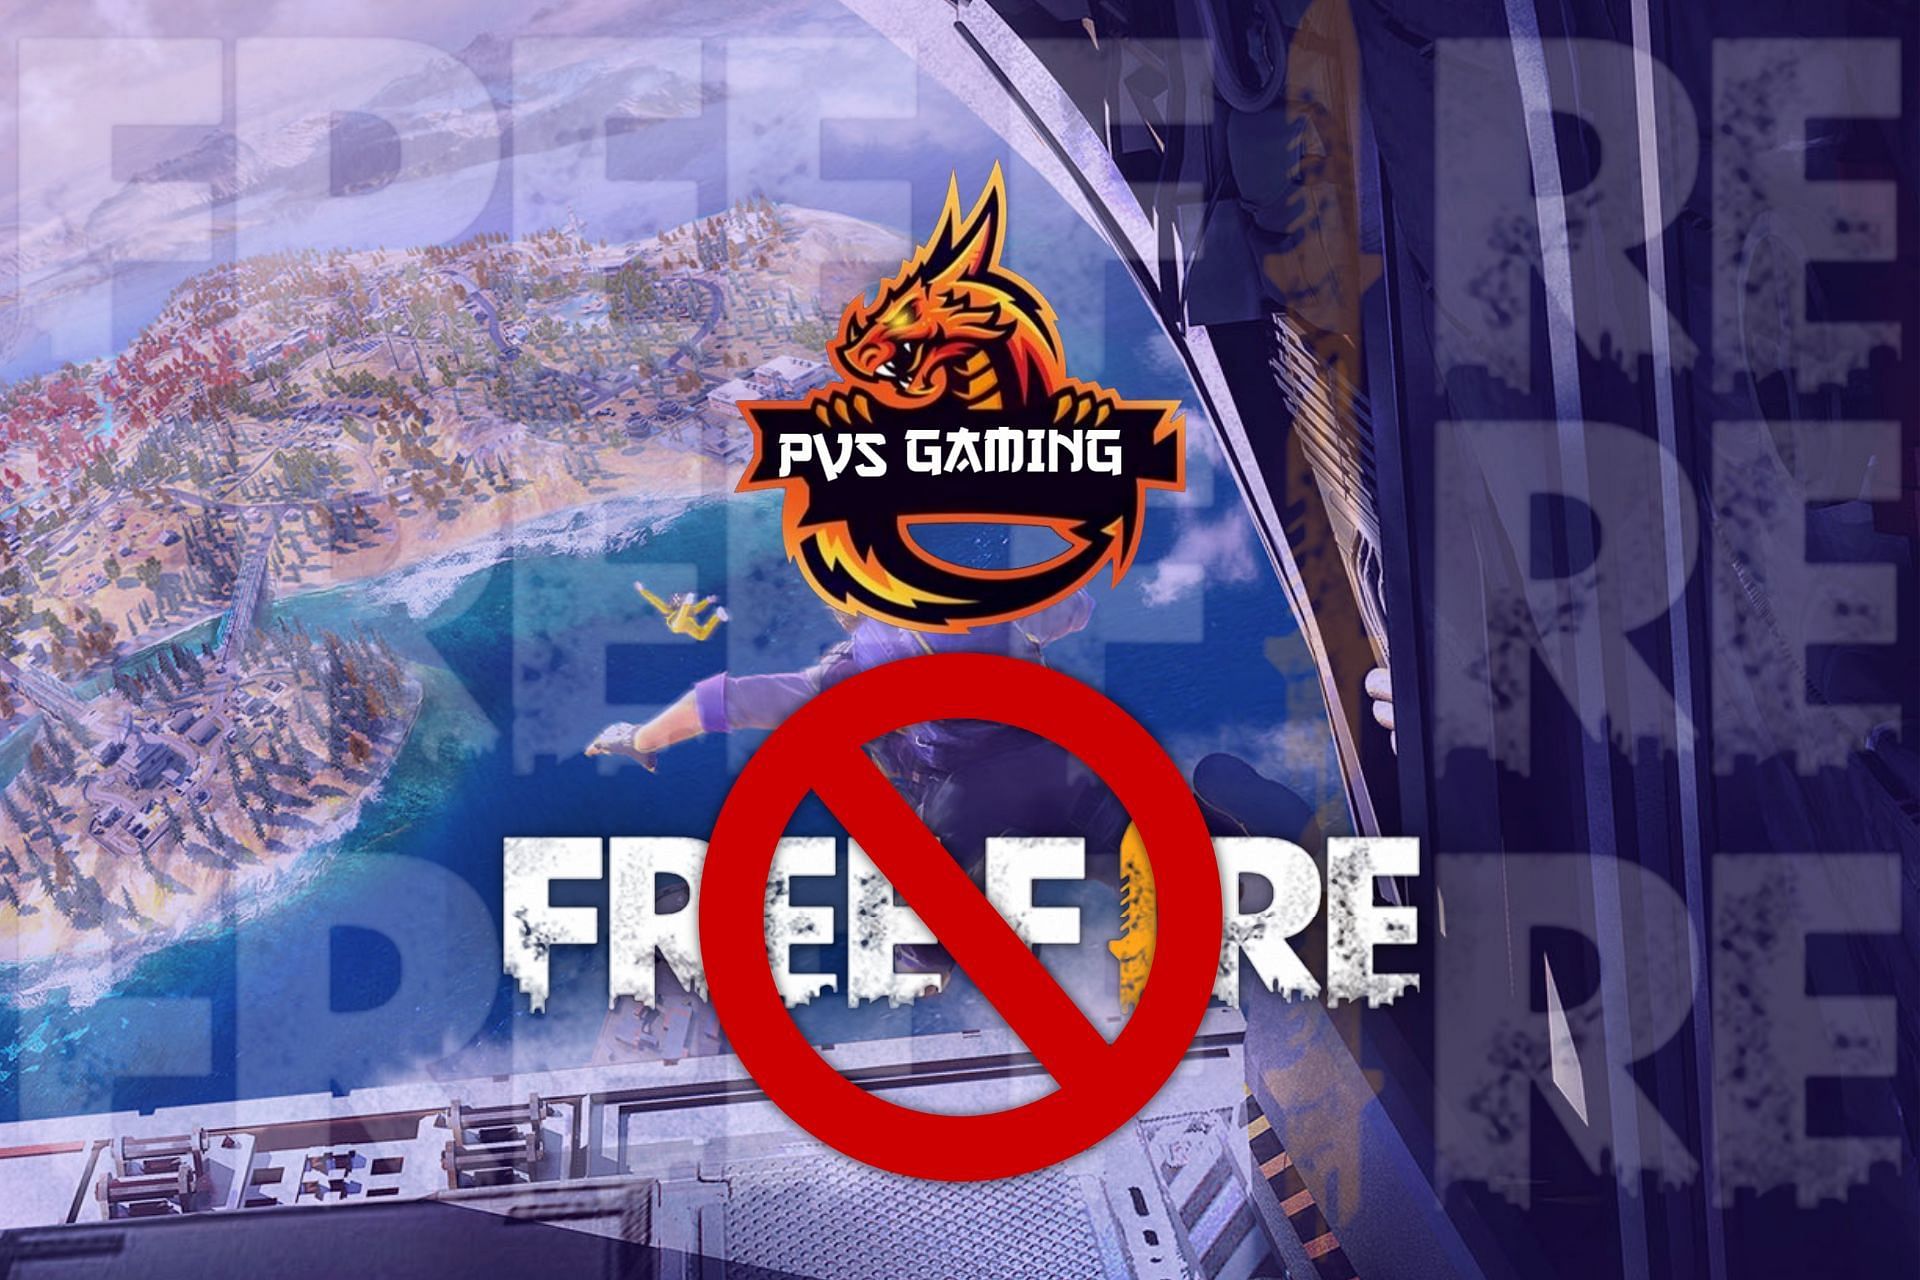 Garena&rsquo;s offering was banned in India last month (Image via Sportskeeda)